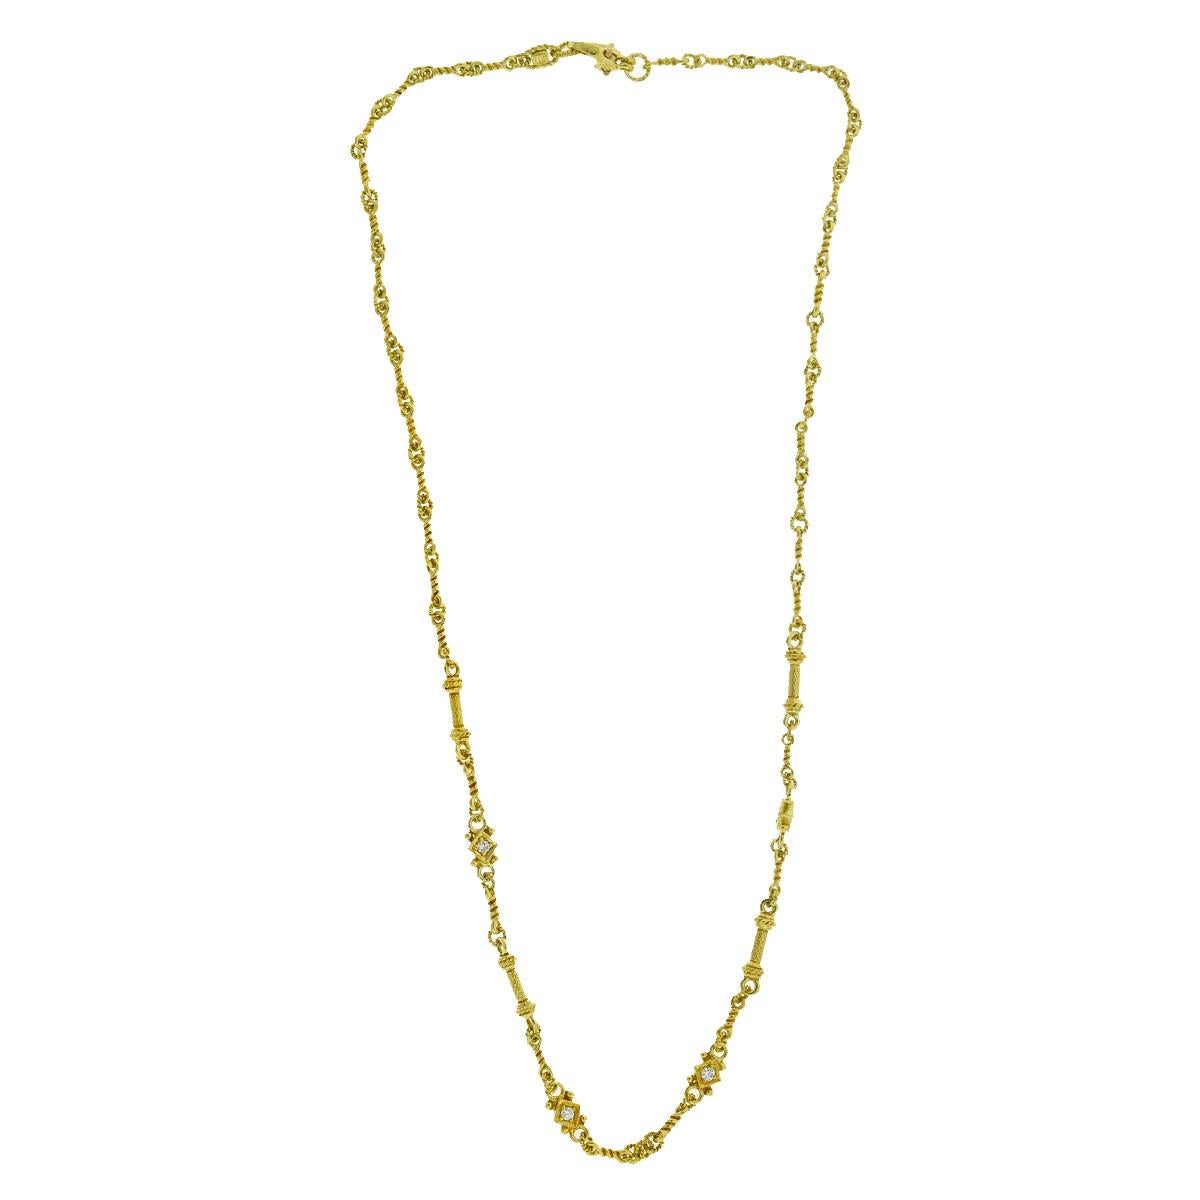 Company-N/A
Style-Greek Style Diamond Chain Necklace Approx 0.12 TCW
Metal-18k Yellow Gold
Chain Length-17